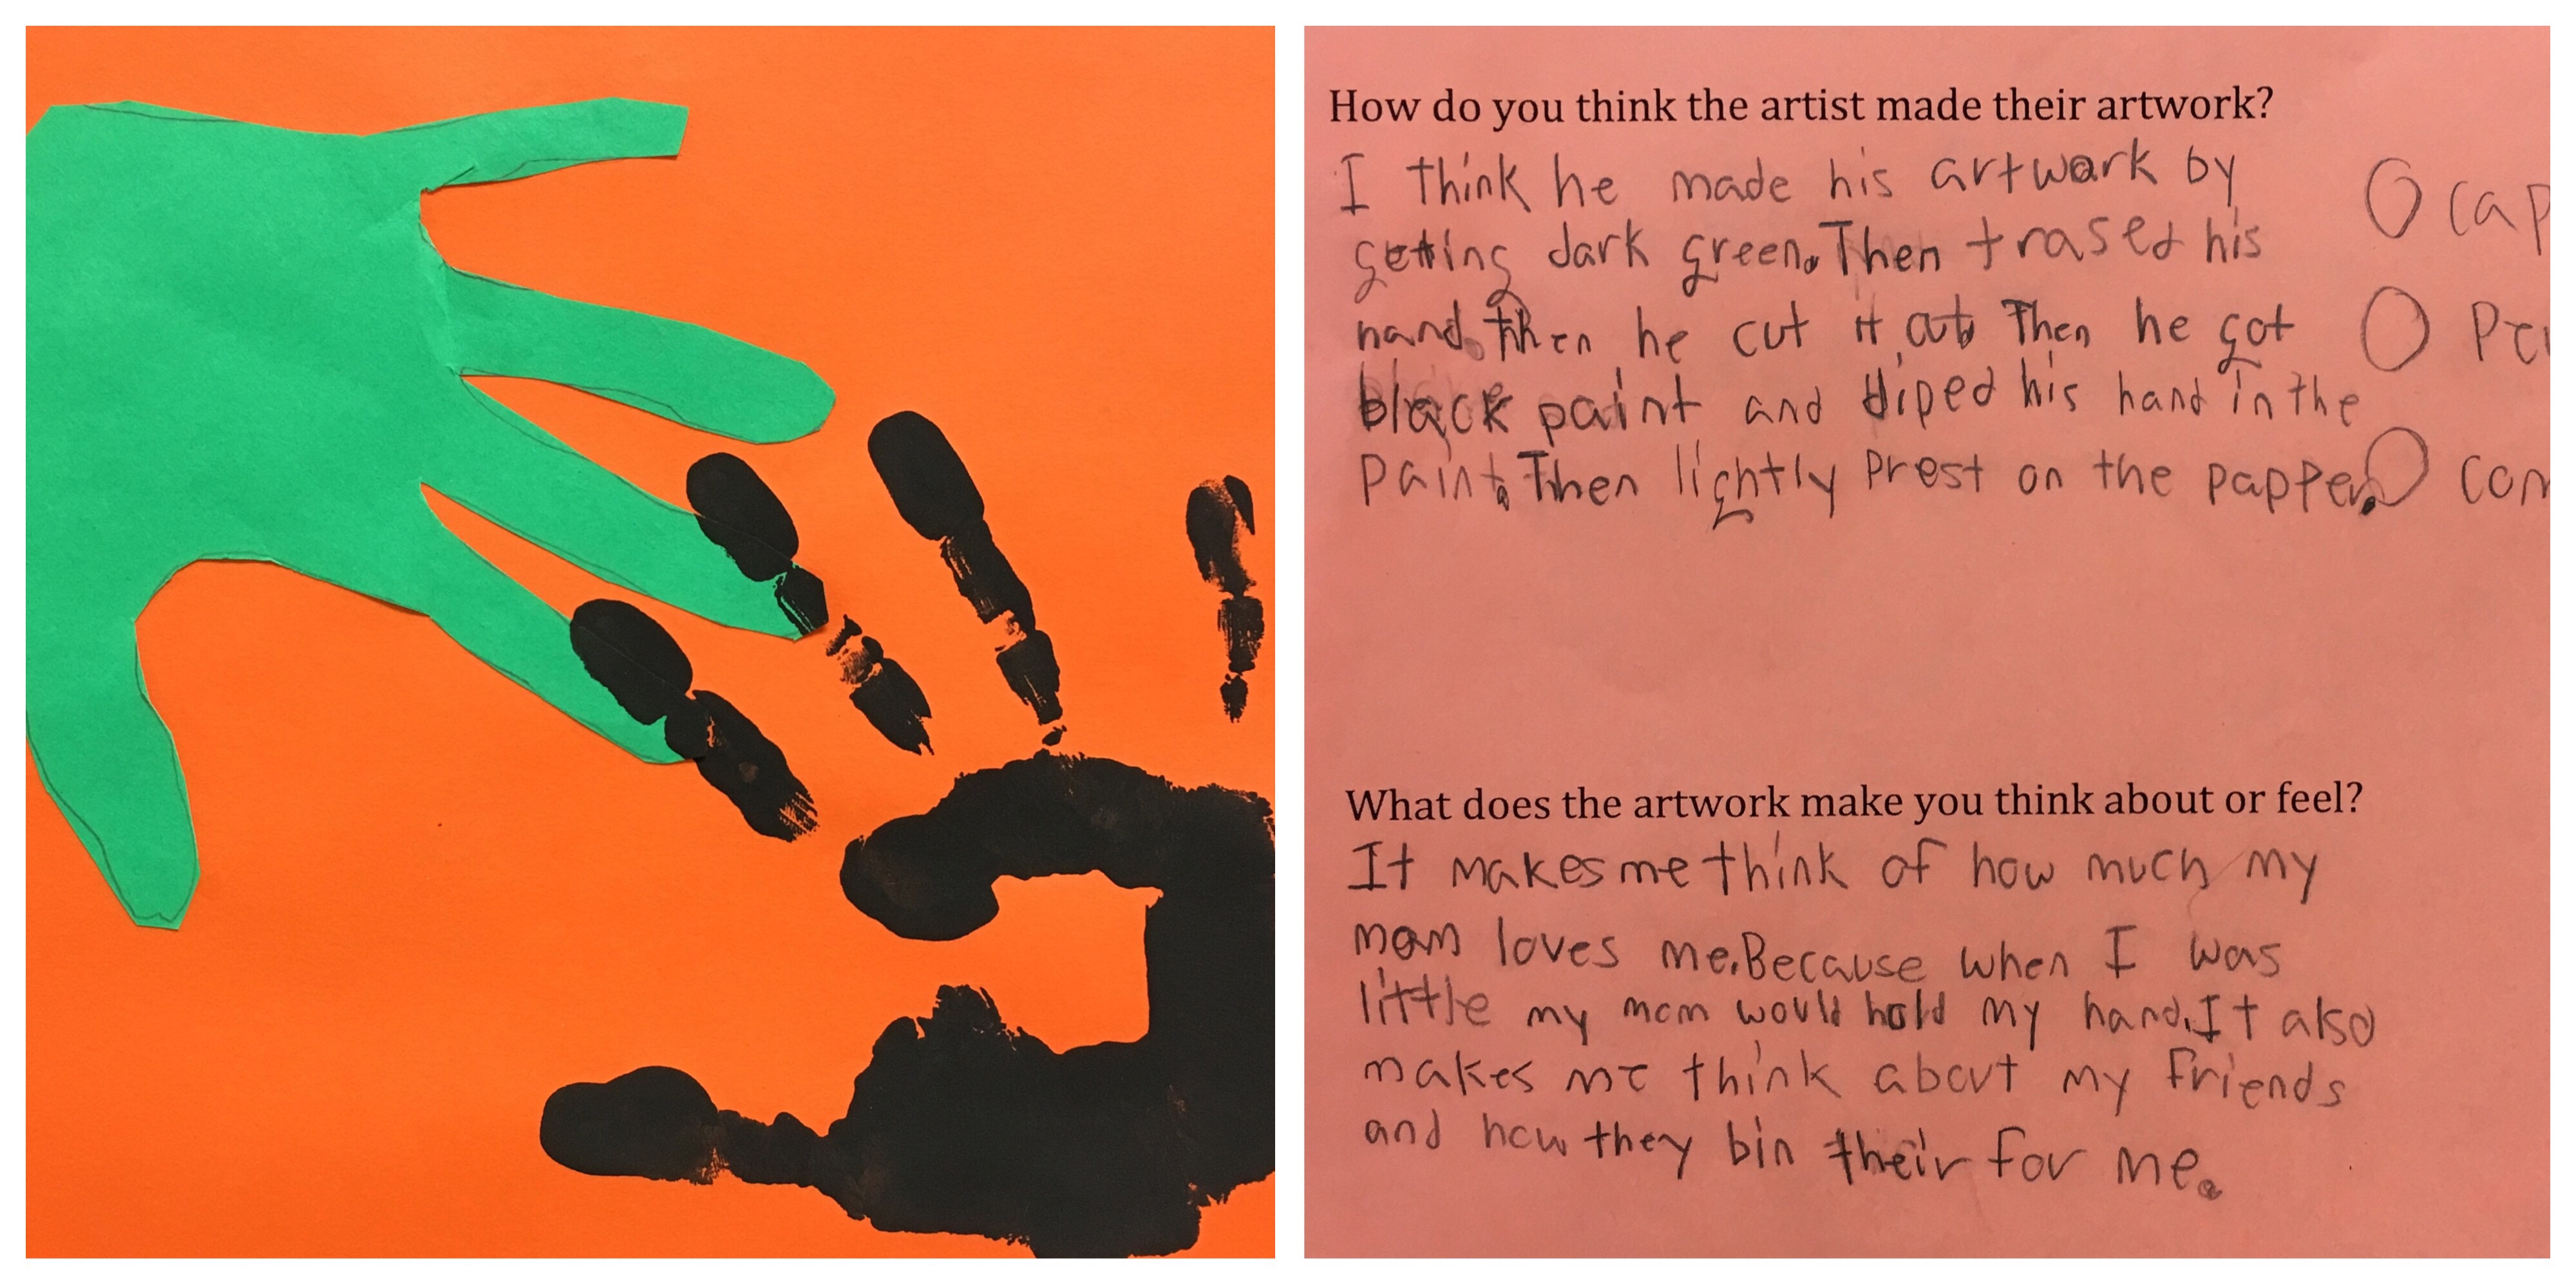 Fourth graders visited the Showcase and wrote about a piece of artwork created by a second grader.